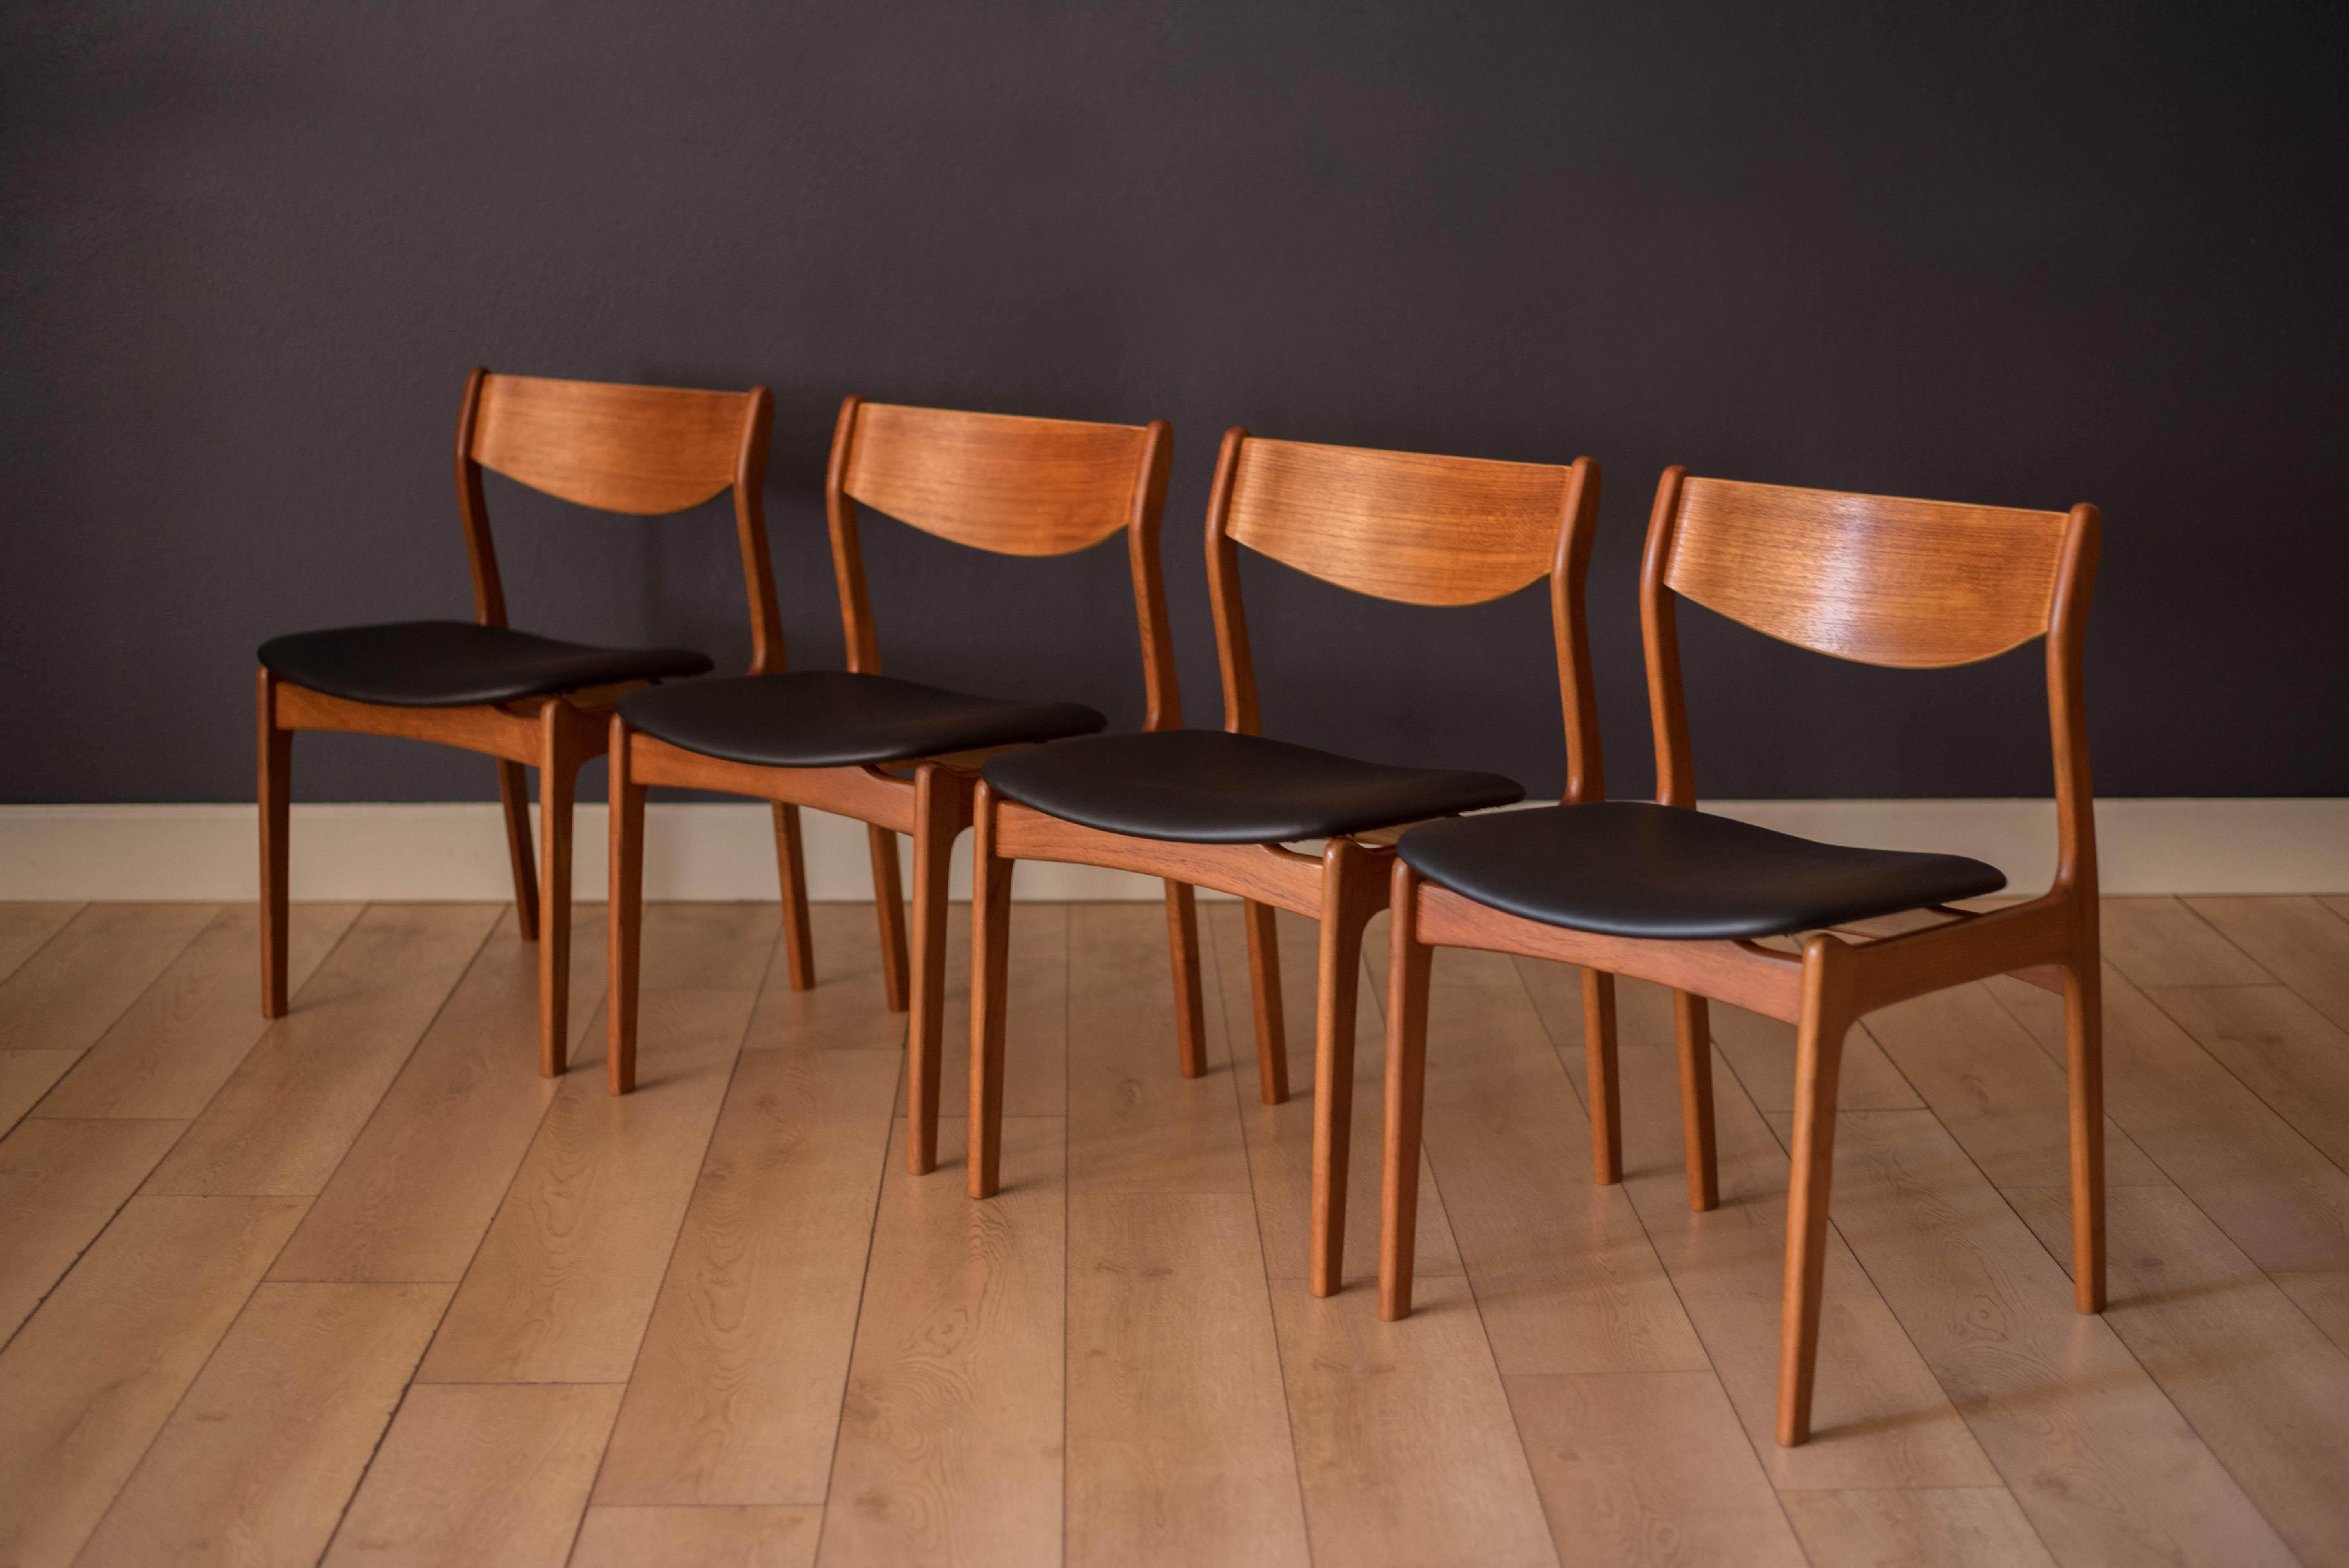 Mid-Century Modern dining chairs designed by P.E. Jorgensen for Farso Stolefabrik, Denmark circa 1960's. This set features unique floating seats and a sculptural teak frame with contrasting birch accents. Includes four side chairs that have been